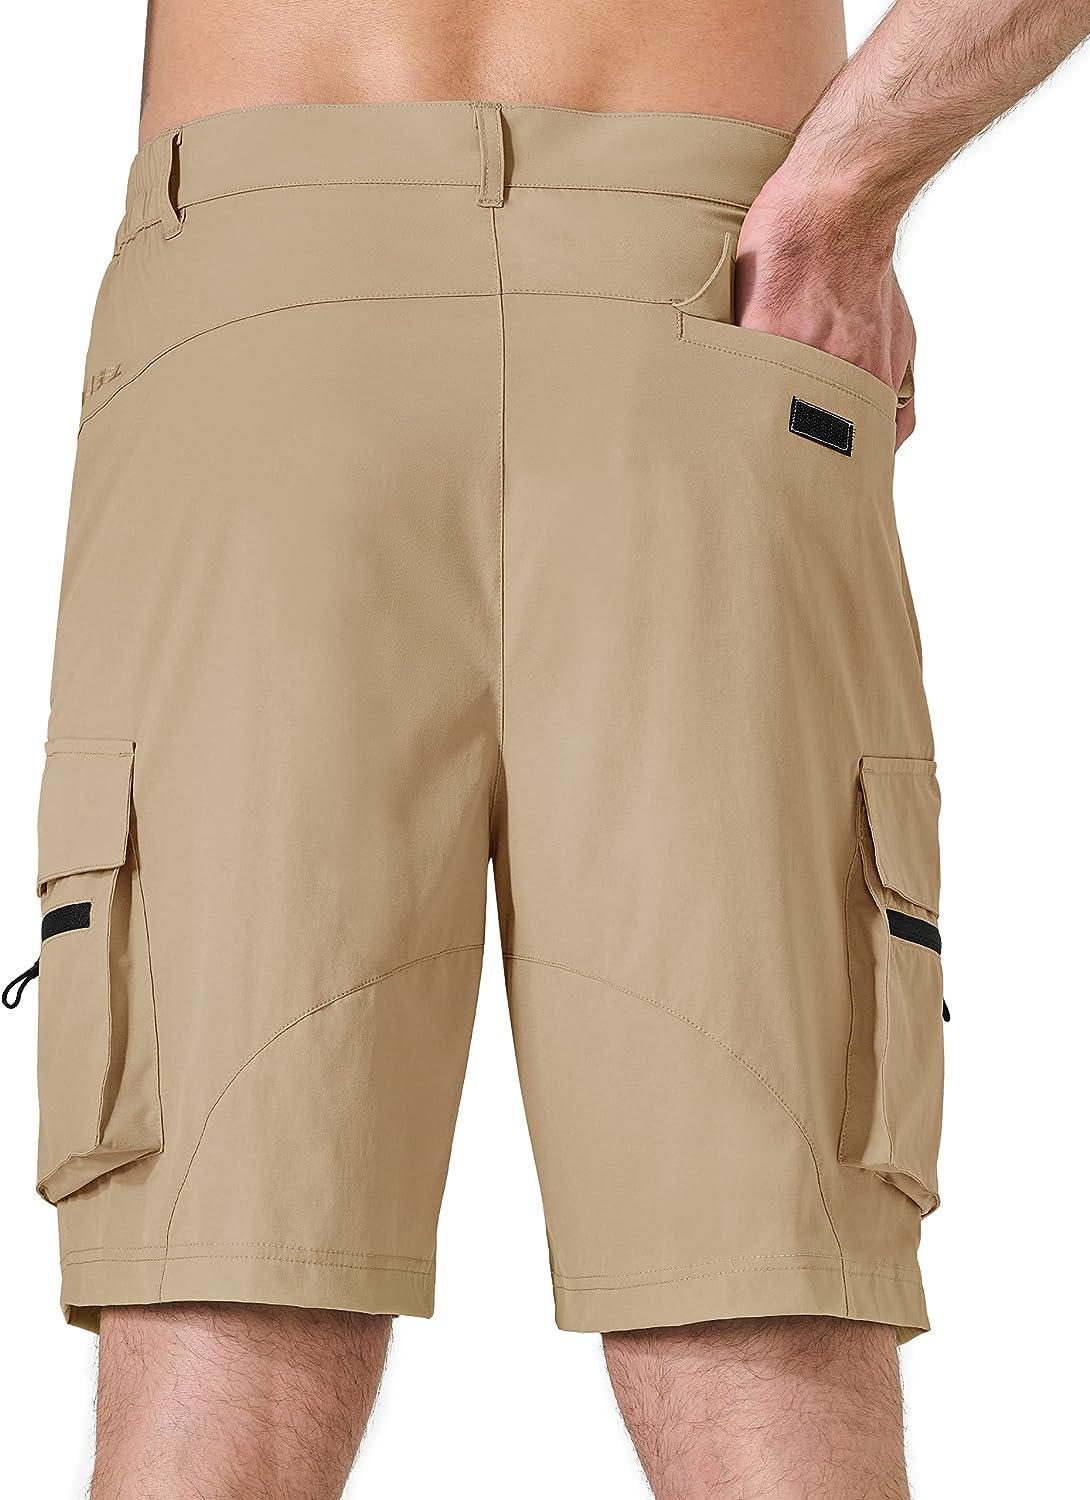 Pausel Men's Hiking Tactical Shorts Cargo Quick Dry Outdoor Golf